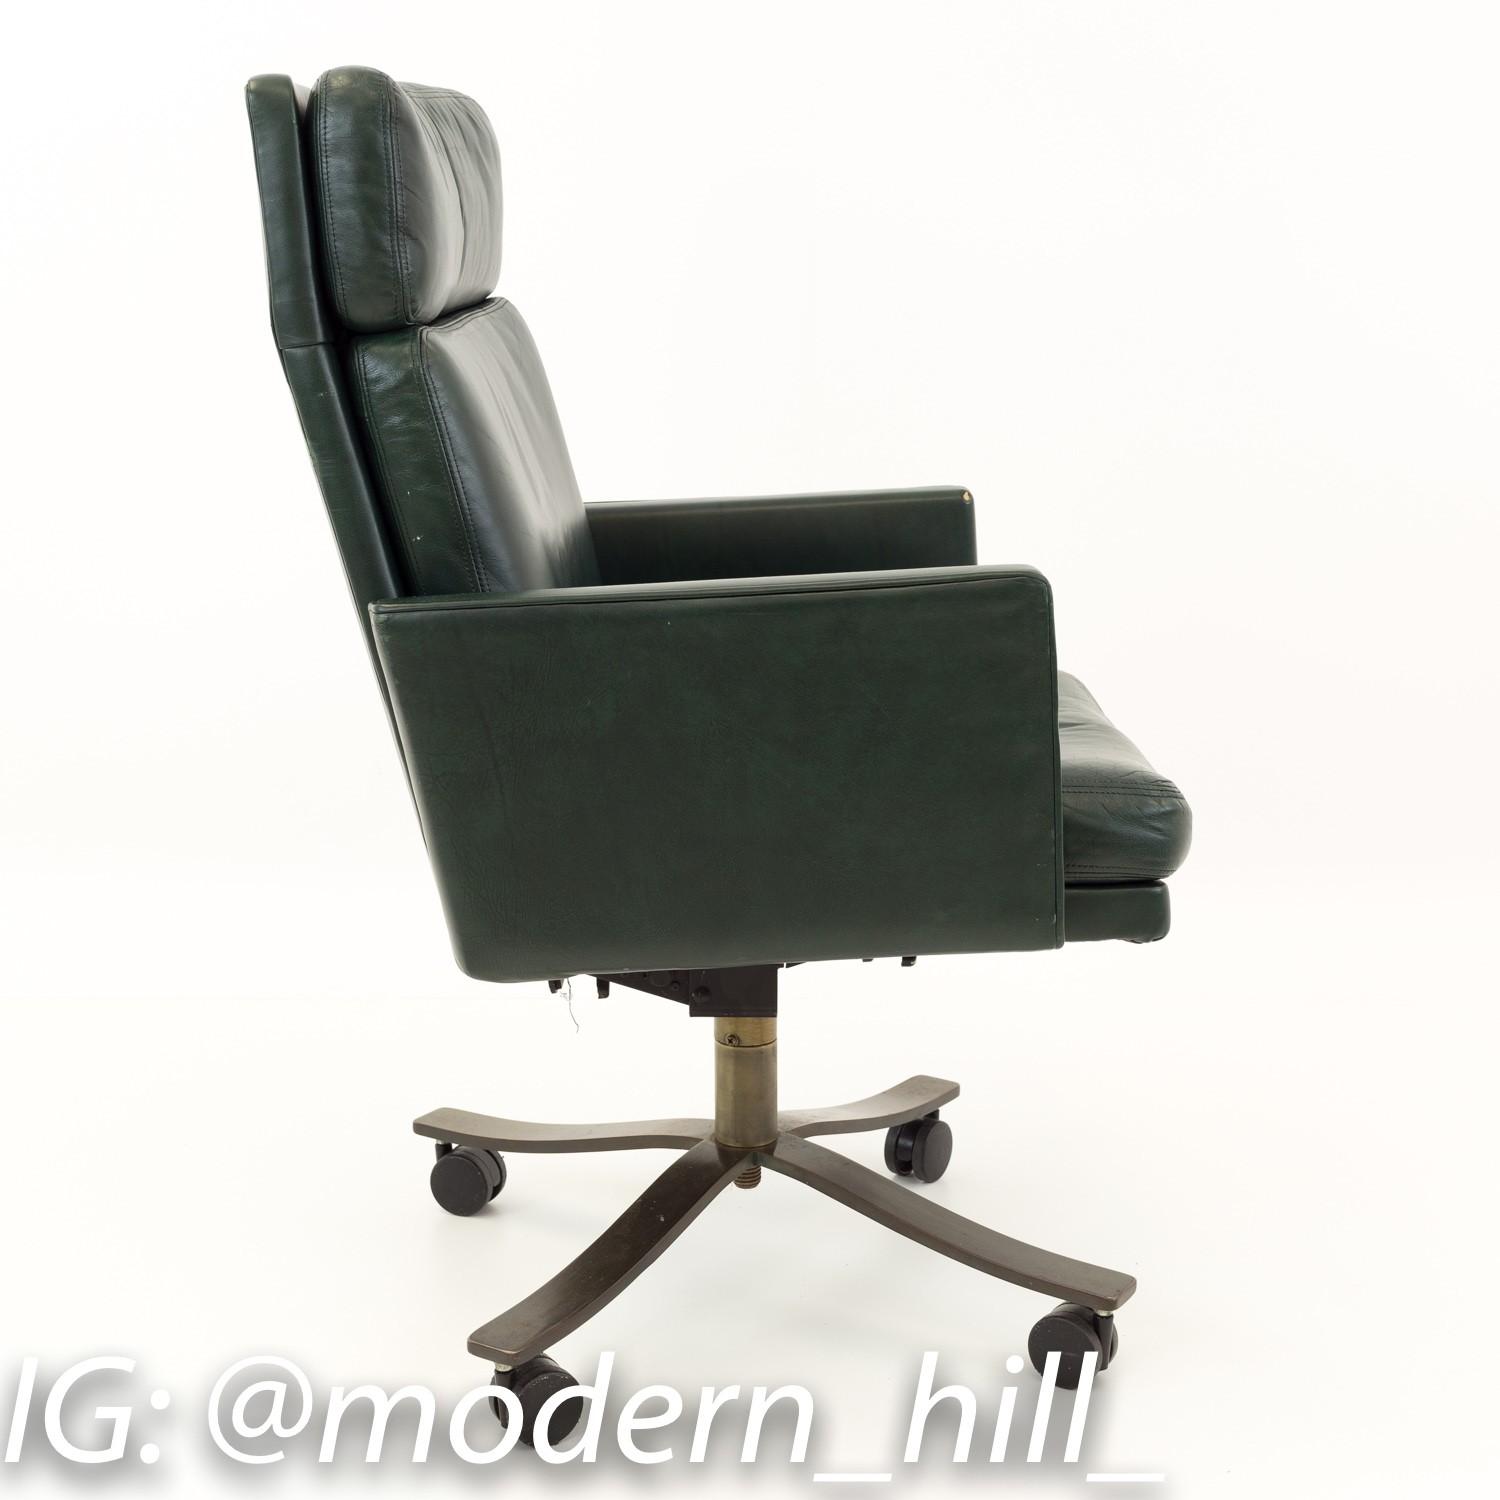 Stow and Davis Mid Century Green Office Desk Chair